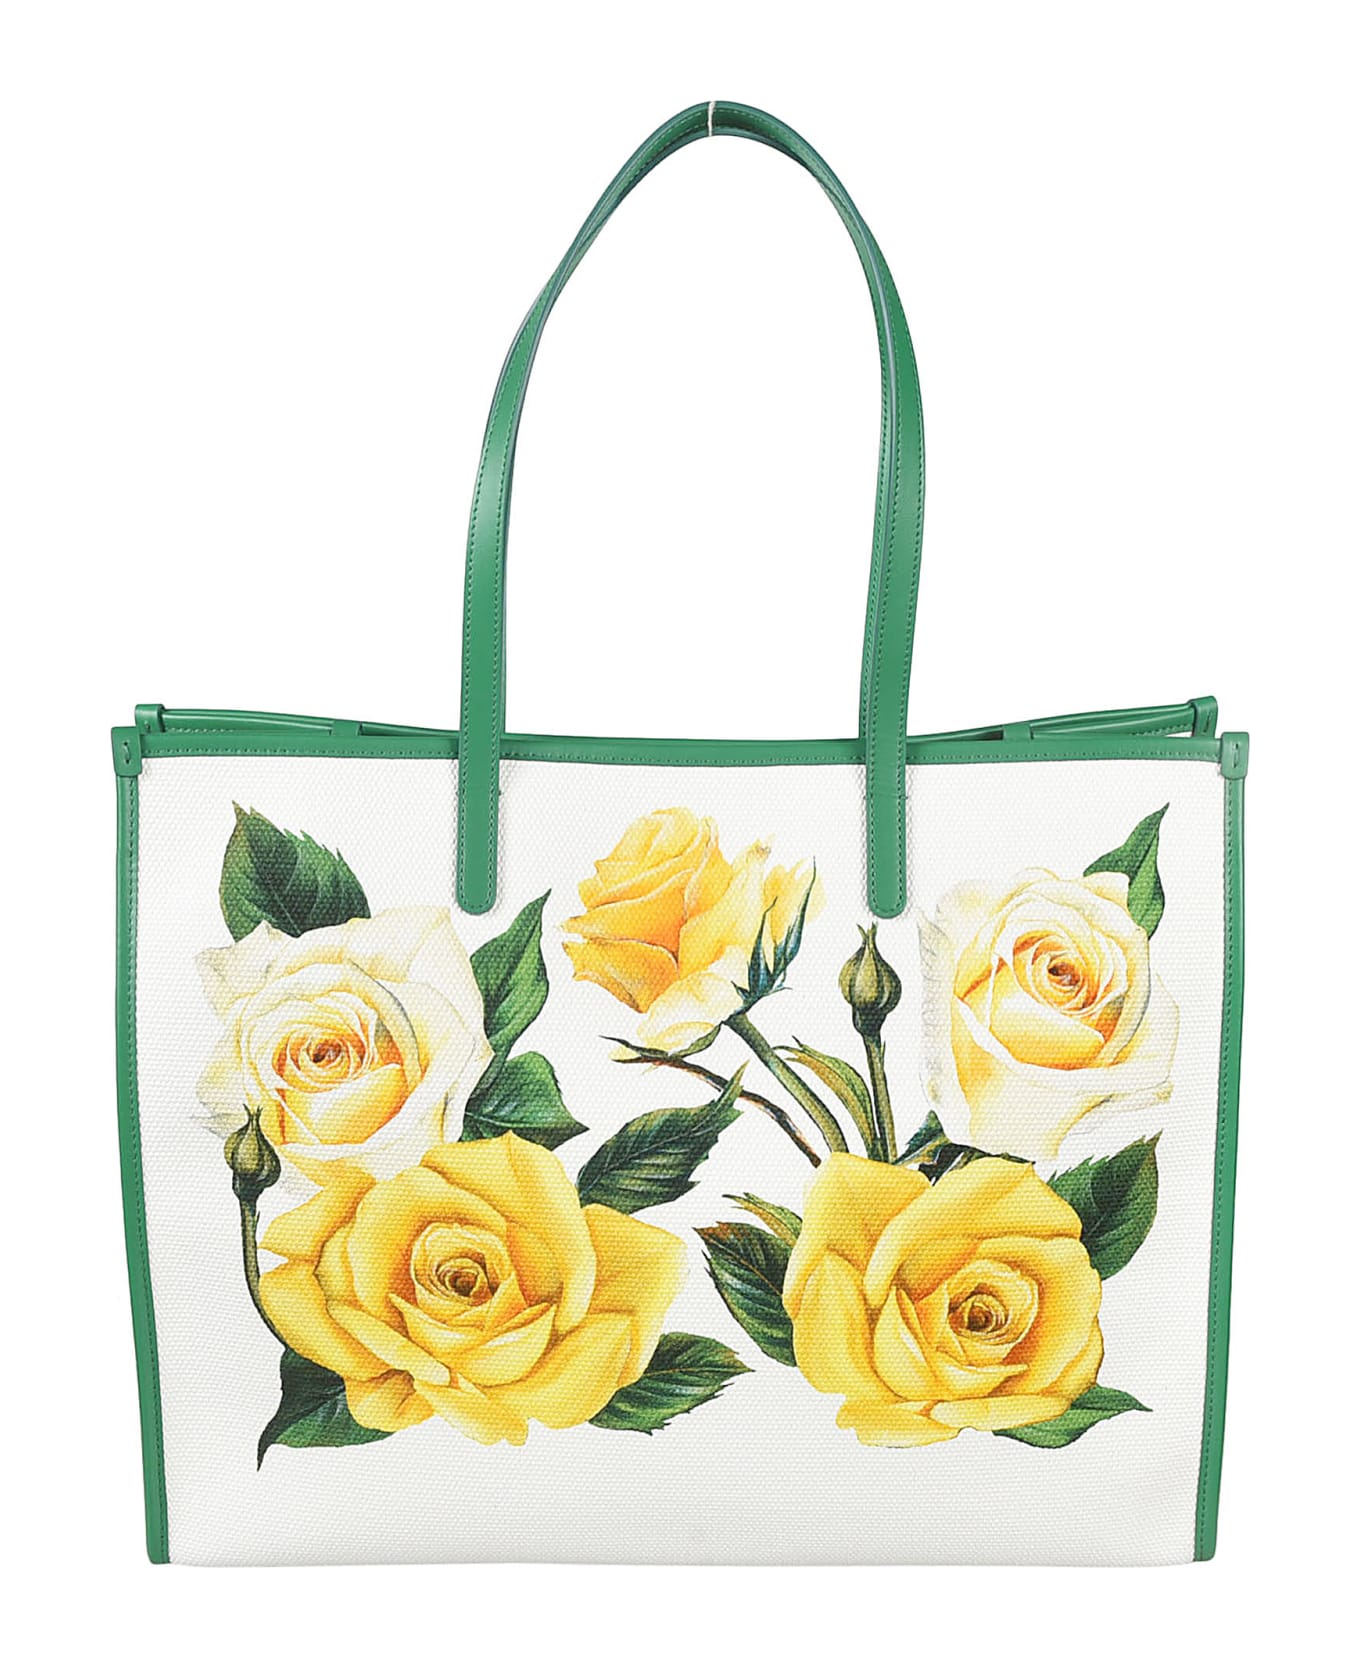 Dolce & Gabbana Floral Print Large Tote - Multicolor トートバッグ